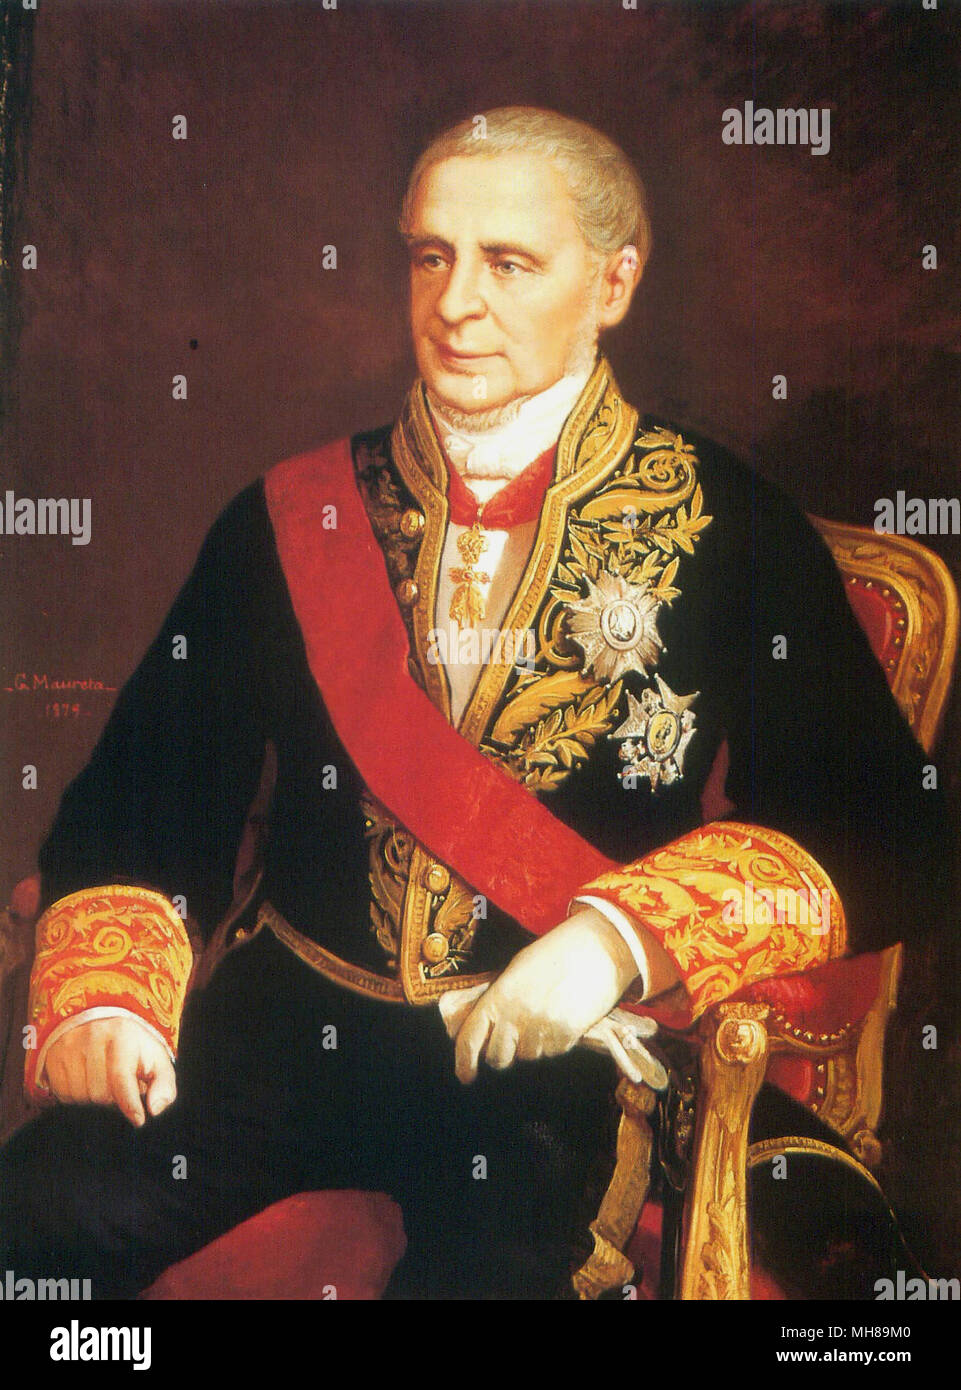 Don Manuel de Pando y Fernández de Pinedo, 6th Marquis of Miraflores Grandee of Spain and 4th Count of la Ventosa (1792 – 1872) Spanish noble and politician, who served two times as Prime Minister of Spain Stock Photo